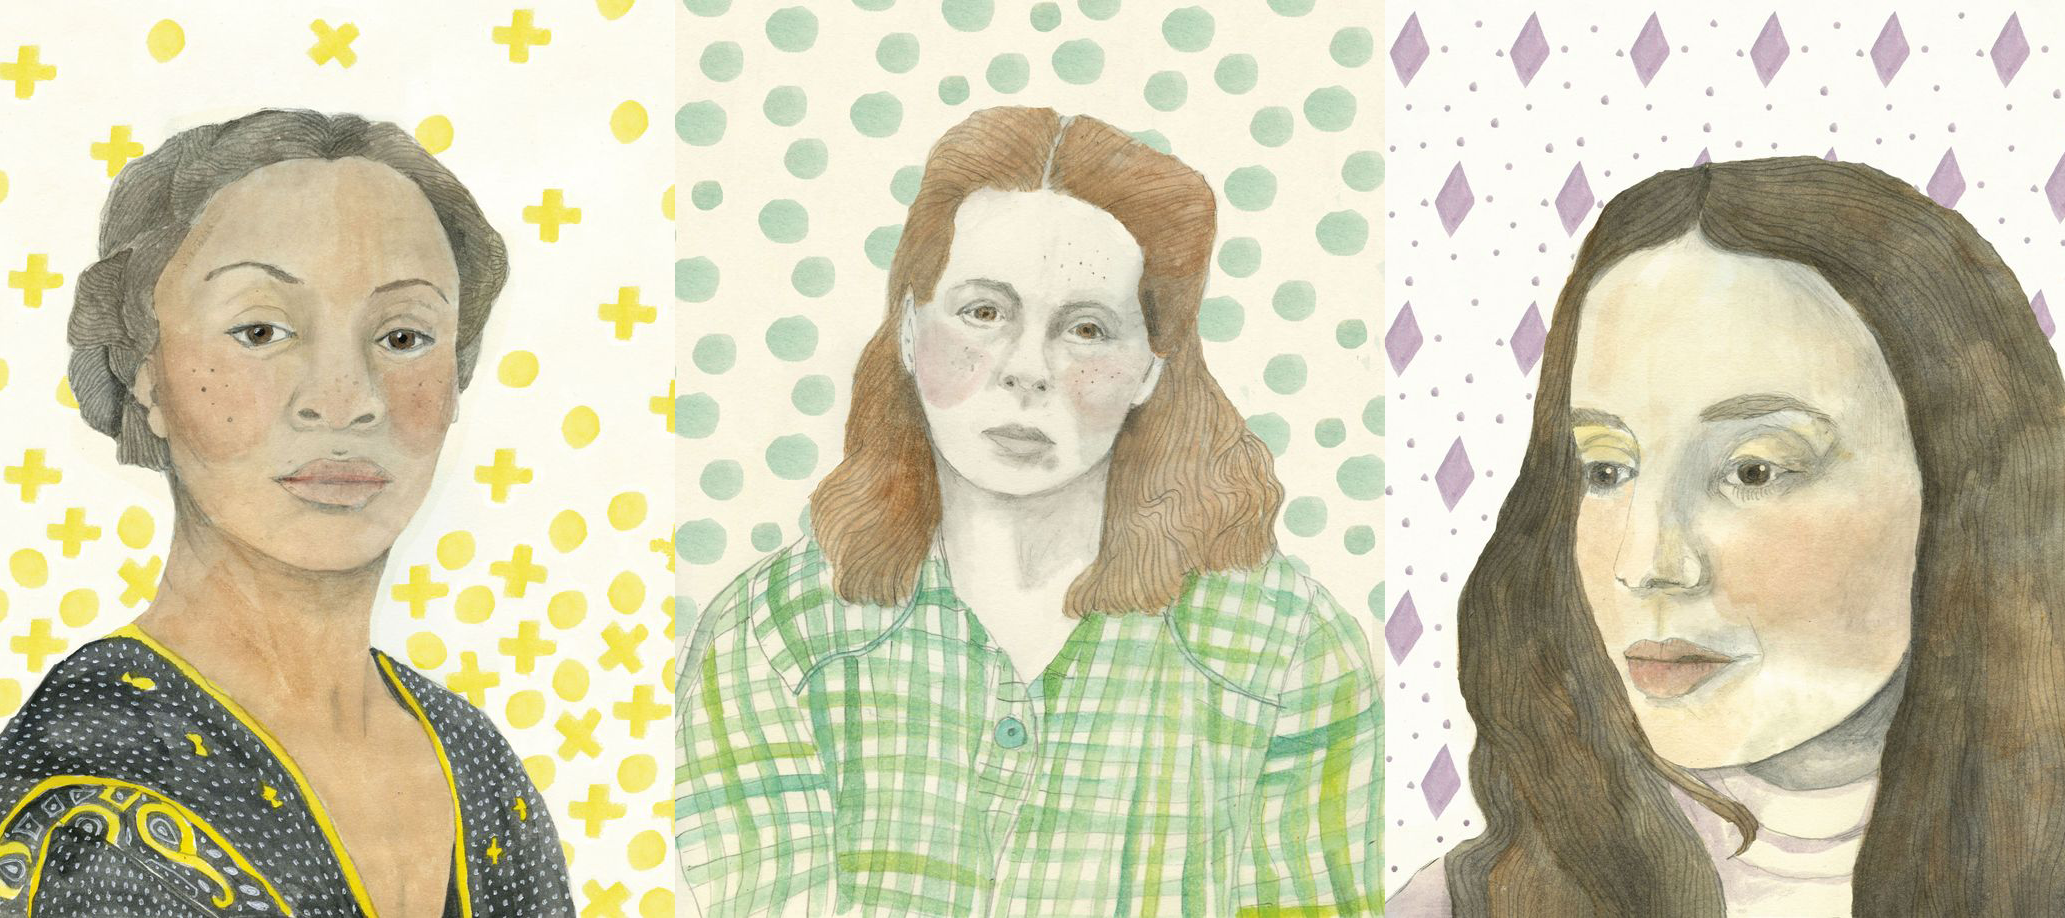 Three soft-colored paintings of prominent women artists—Kara Walker, Alice Neel, and Ana Mendieta (left to right)—against backgrounds of colorful shapes. Walker has medium-dark skin and dark hair; Neel has light skin and short, brown hair; and Mendieta had light skin and long, dark hair.